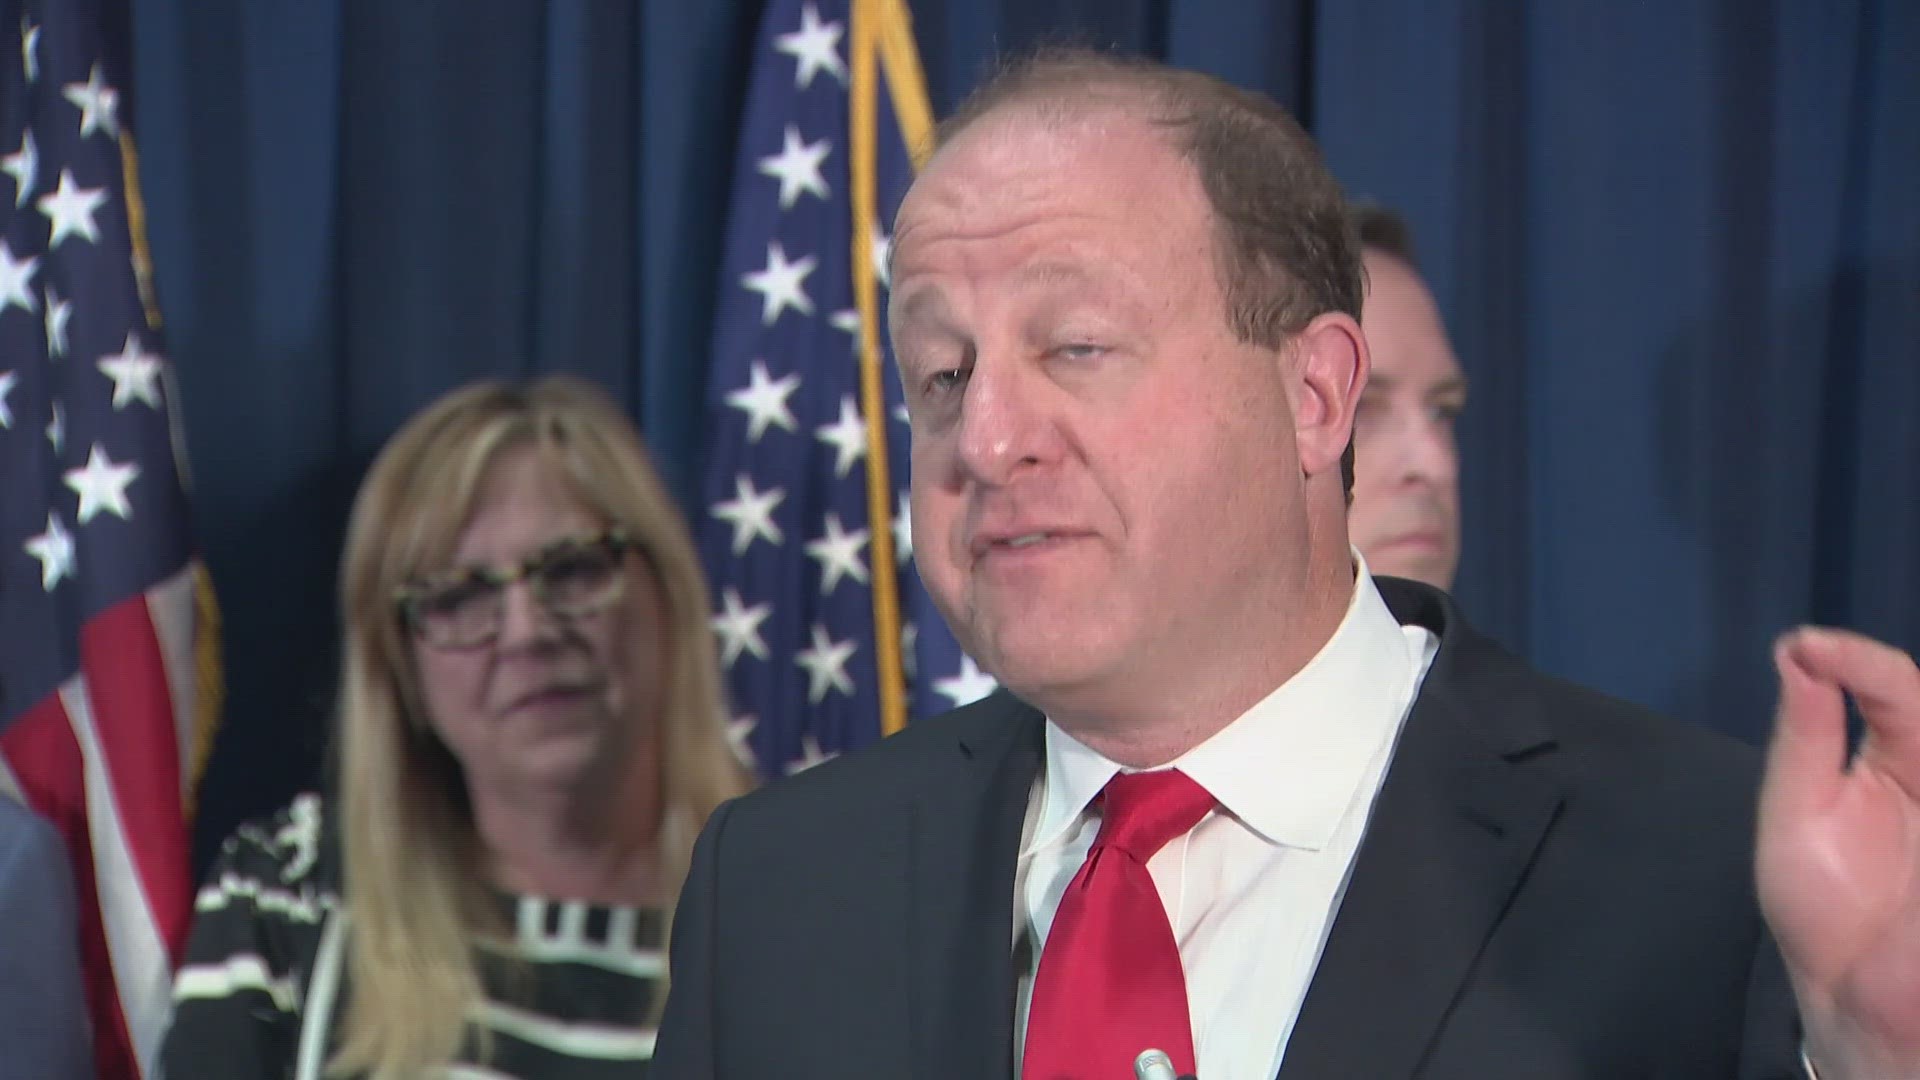 Gov. Jared Polis said the proposal to slow property tax increases would be a long-term solution. Voters will get decide in November.